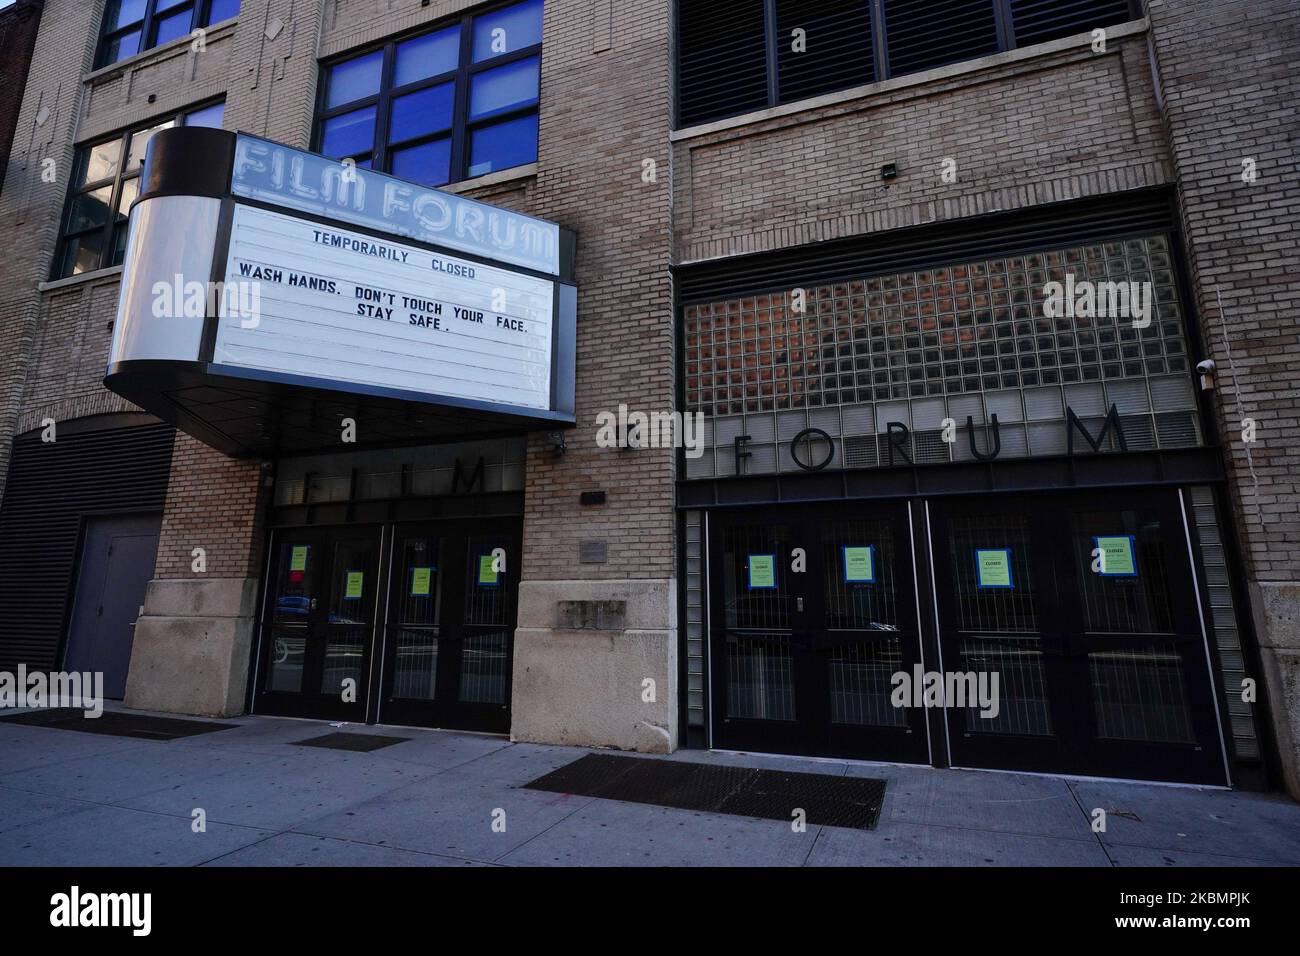 A view of a movie theater in Manhattan, New York City, USA during coronavirus pandemic on April 22, 2020. CNN reported that President Trump outlined a plan Thursday to reopen the economy. In the first phase, large venues like movie theaters can operate 'under strict social distancing protocols.' (Photo by John Nacion/NurPhoto) Stock Photo